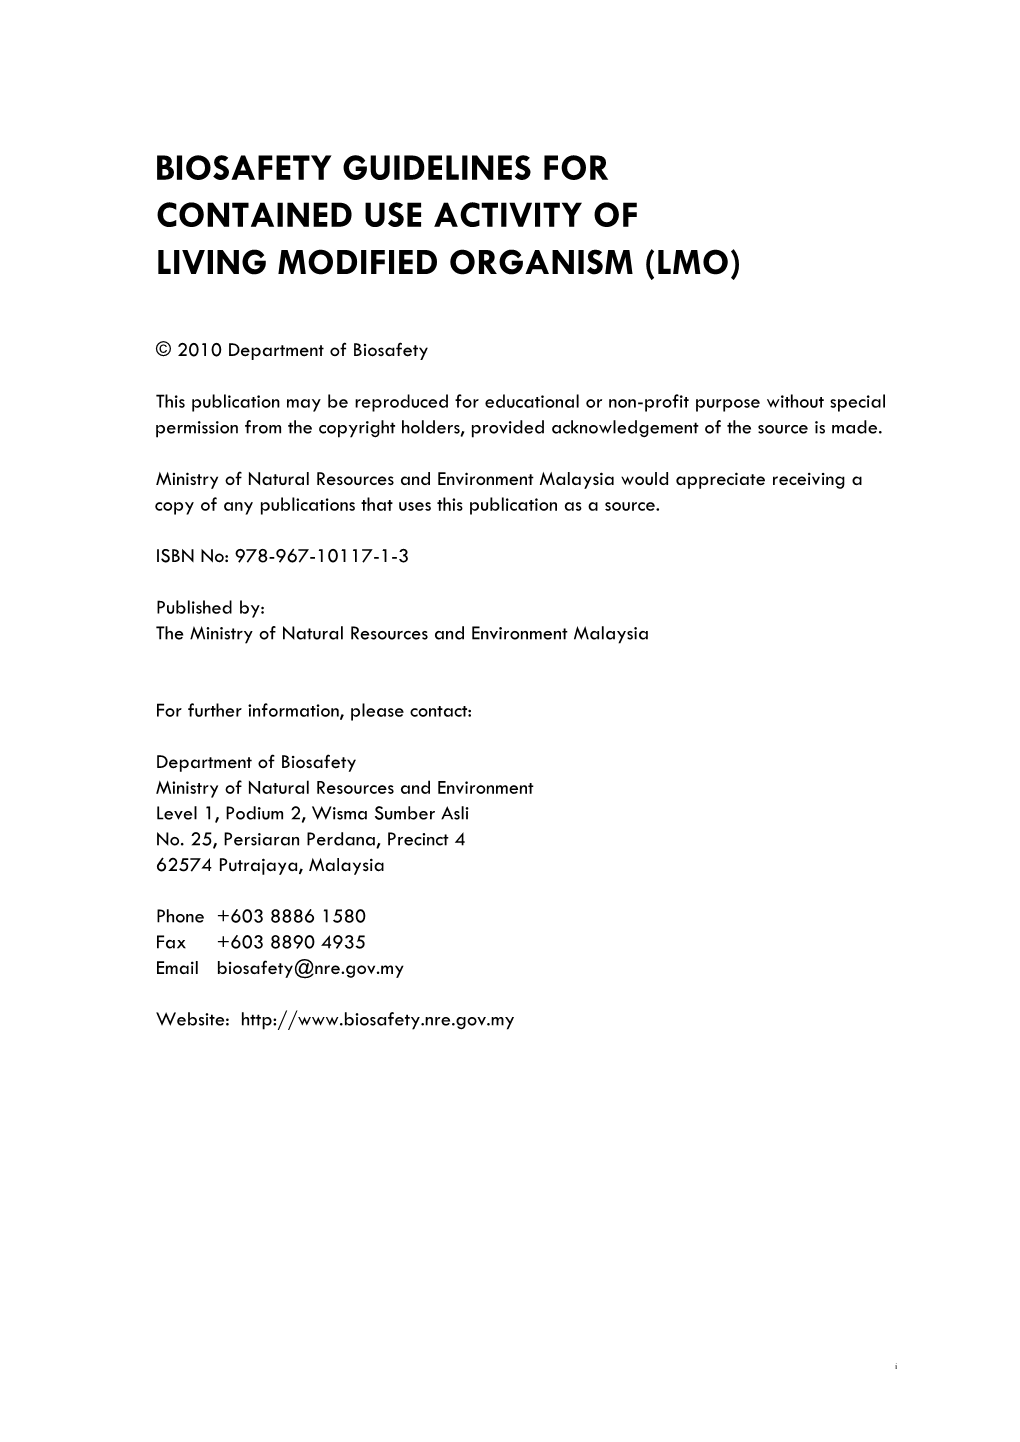 Biosafety Guidelines for Contained Use Activity of Living Modified Organism (Lmo)